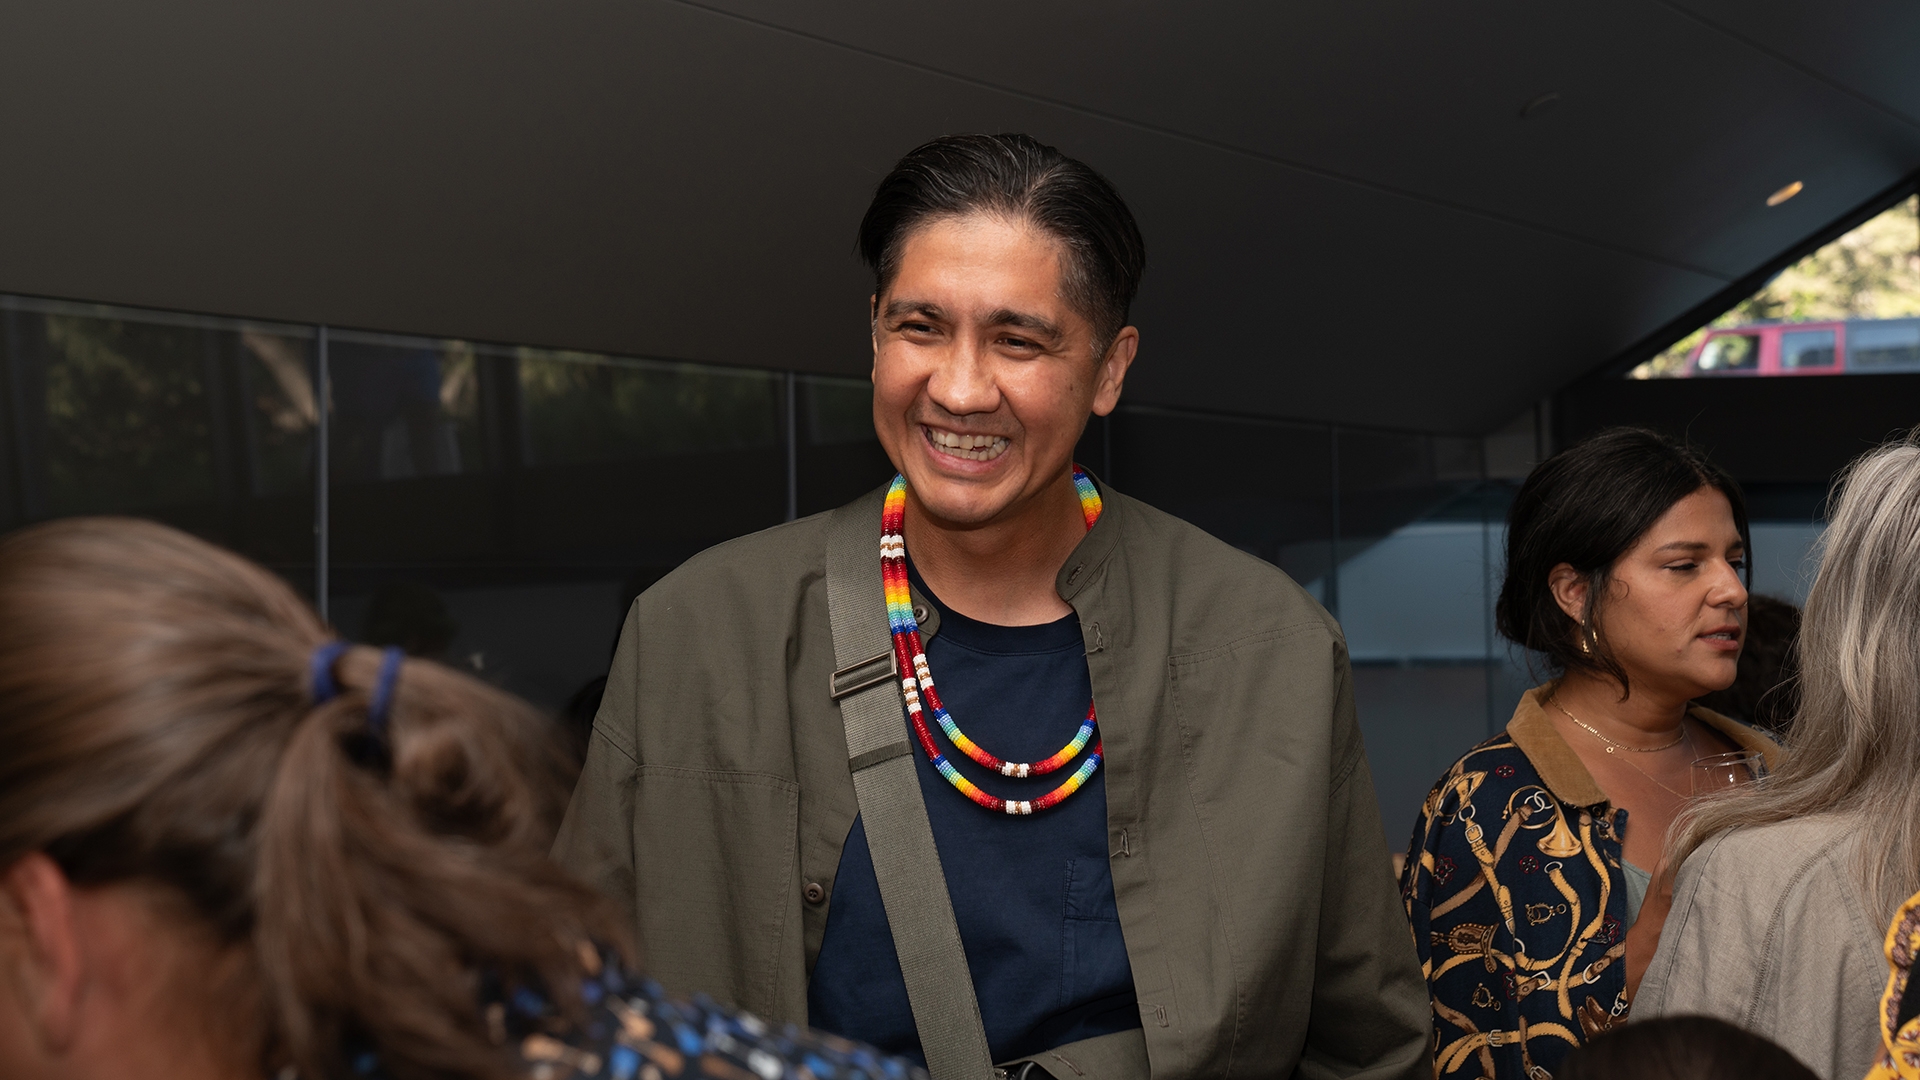 a person with short dark hair wearing a bright beaded necklace smiles at a person out of the frame